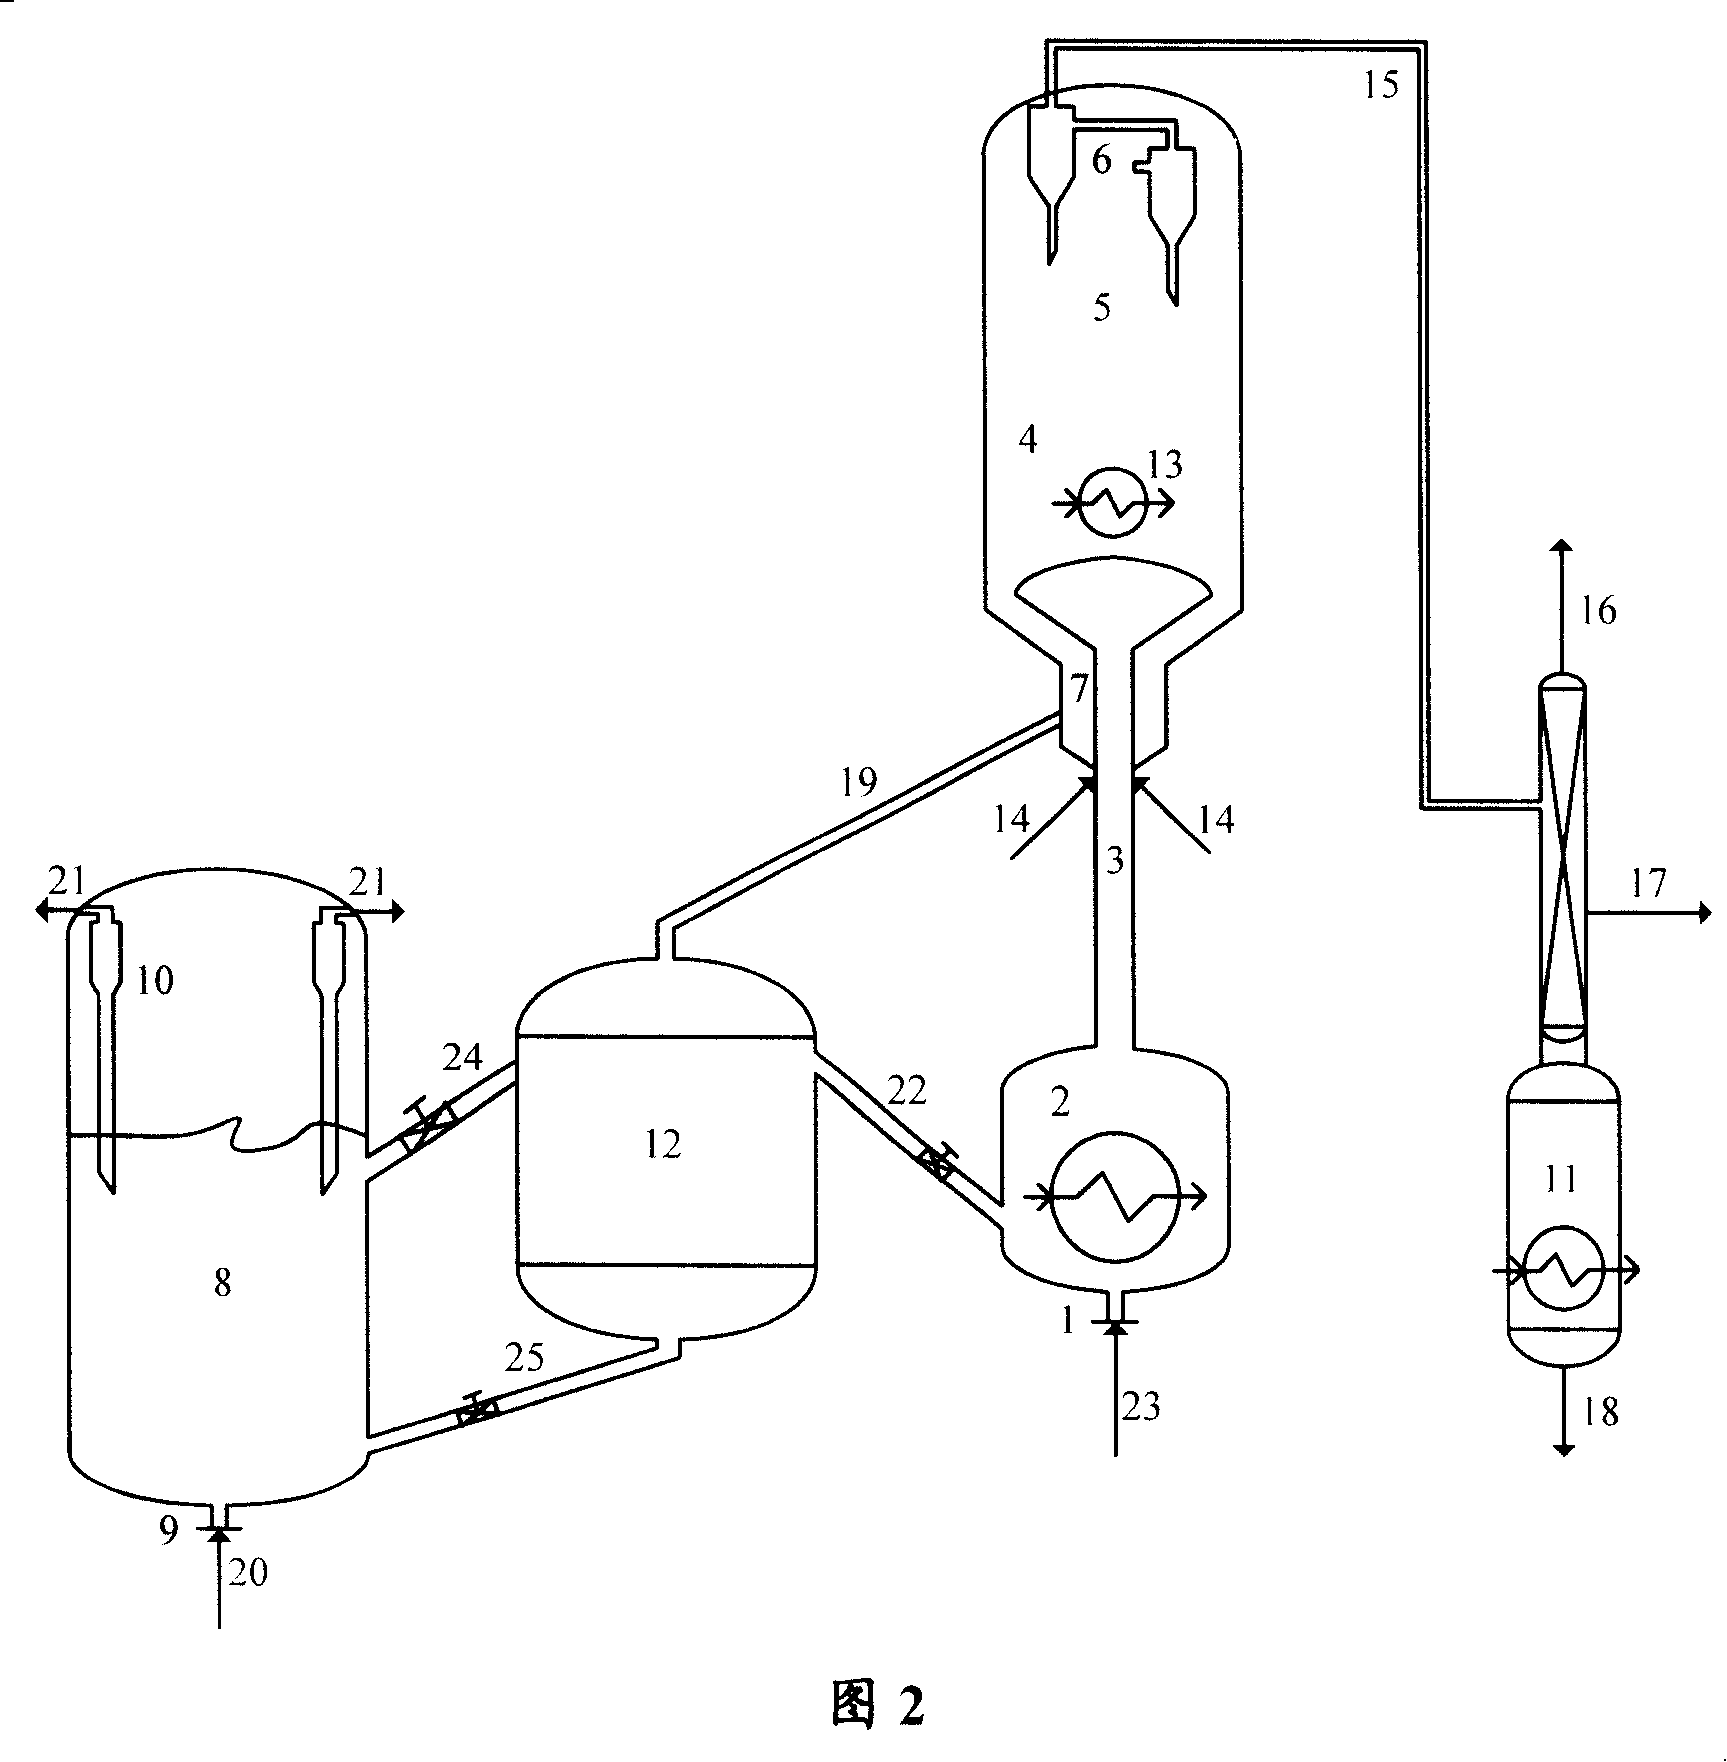 Liquefaction catalytic conversion method for producing dimethyl ether with methanol